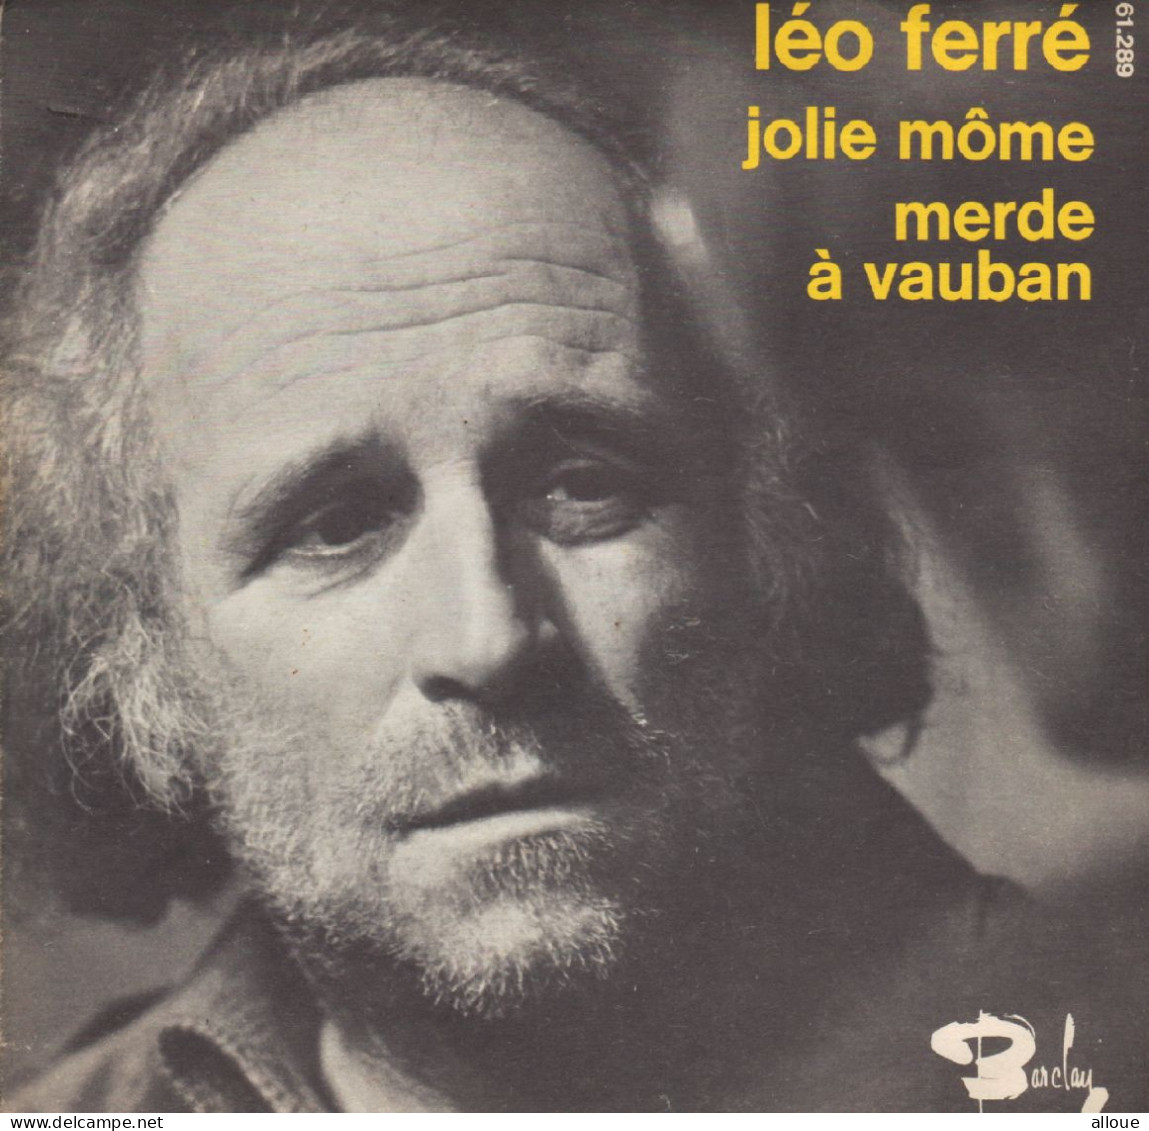 LEO FERRE - FR SP - JOLIE MOME + 1 - Other - French Music